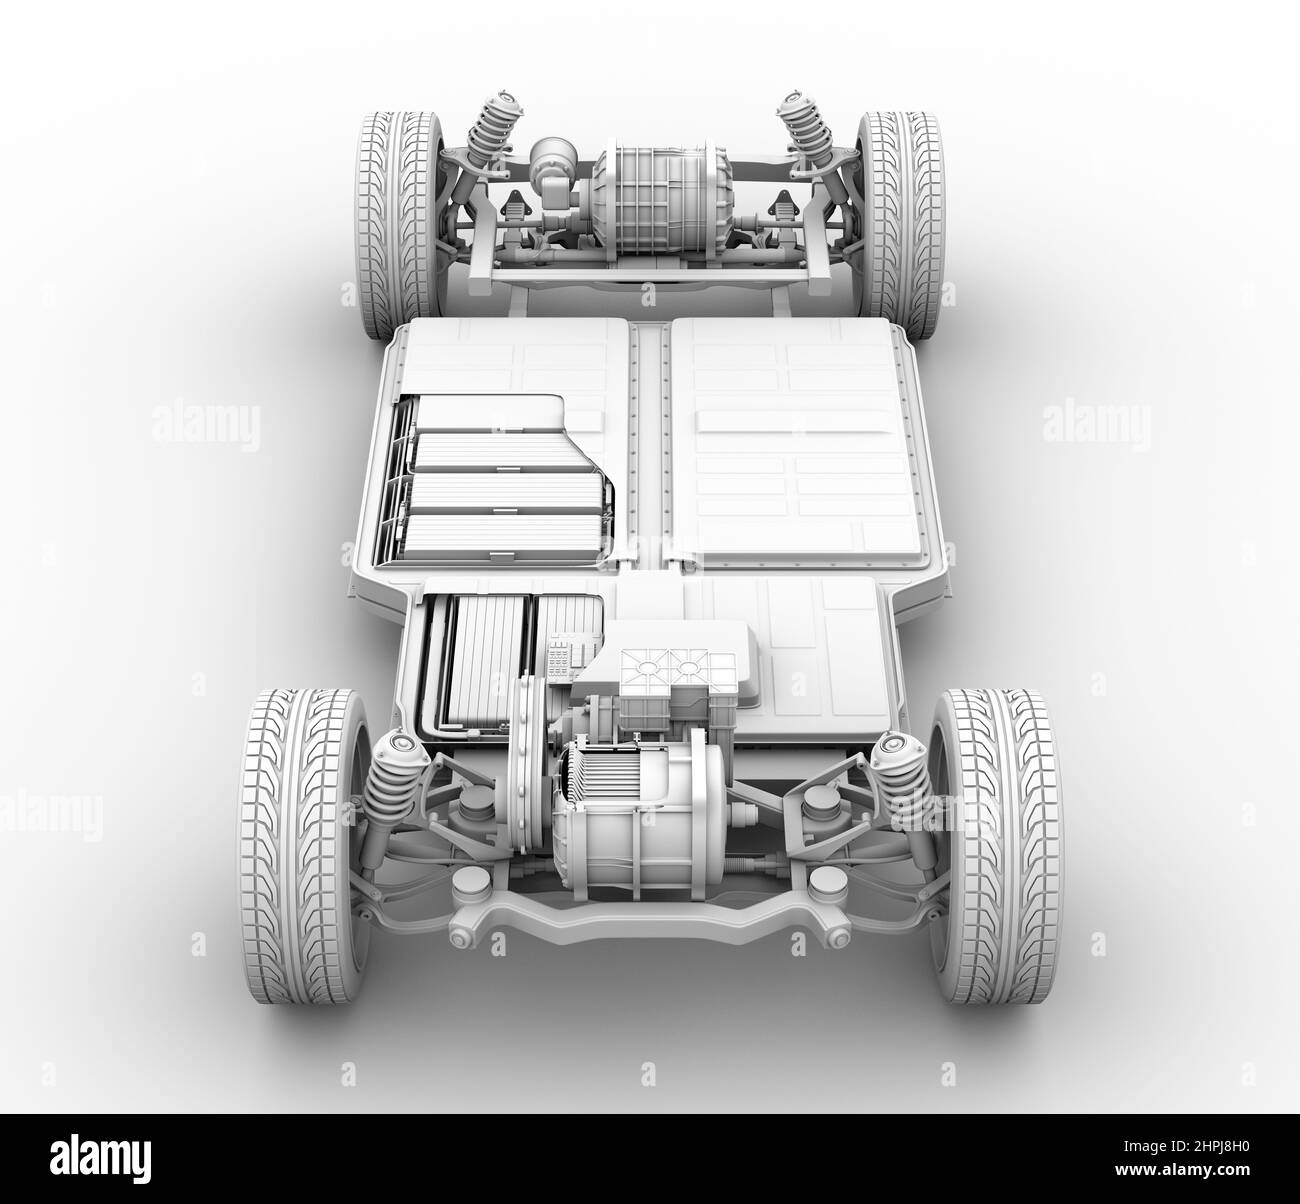 Clay rendering. Cutaway View of Electric Vehicle Battery Pack. 3D rendering image. Stock Photo